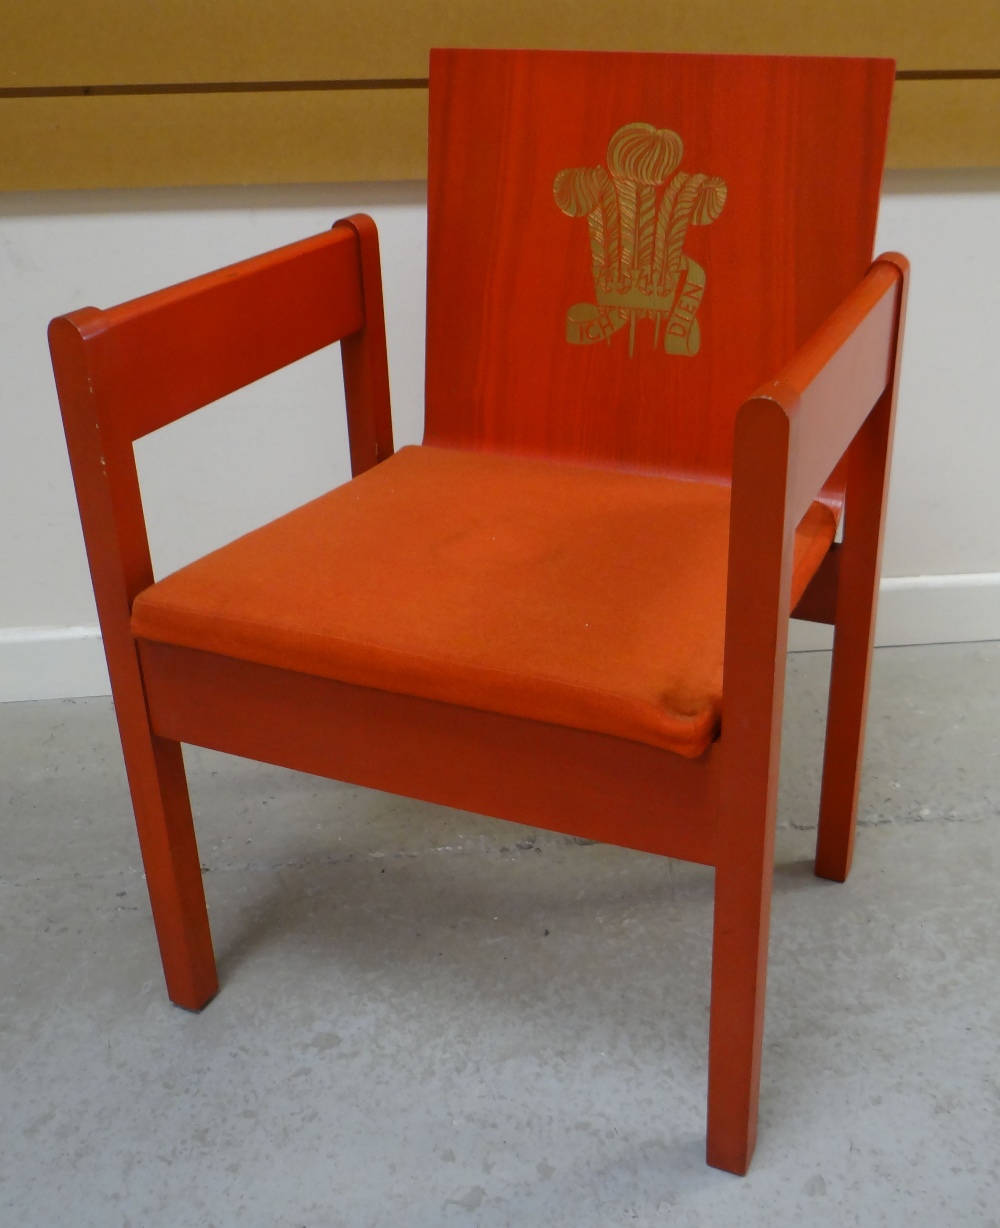 INVESTITURE CHAIR an icon of design being the 1969 Prince of Wales Investiture chair by Lord